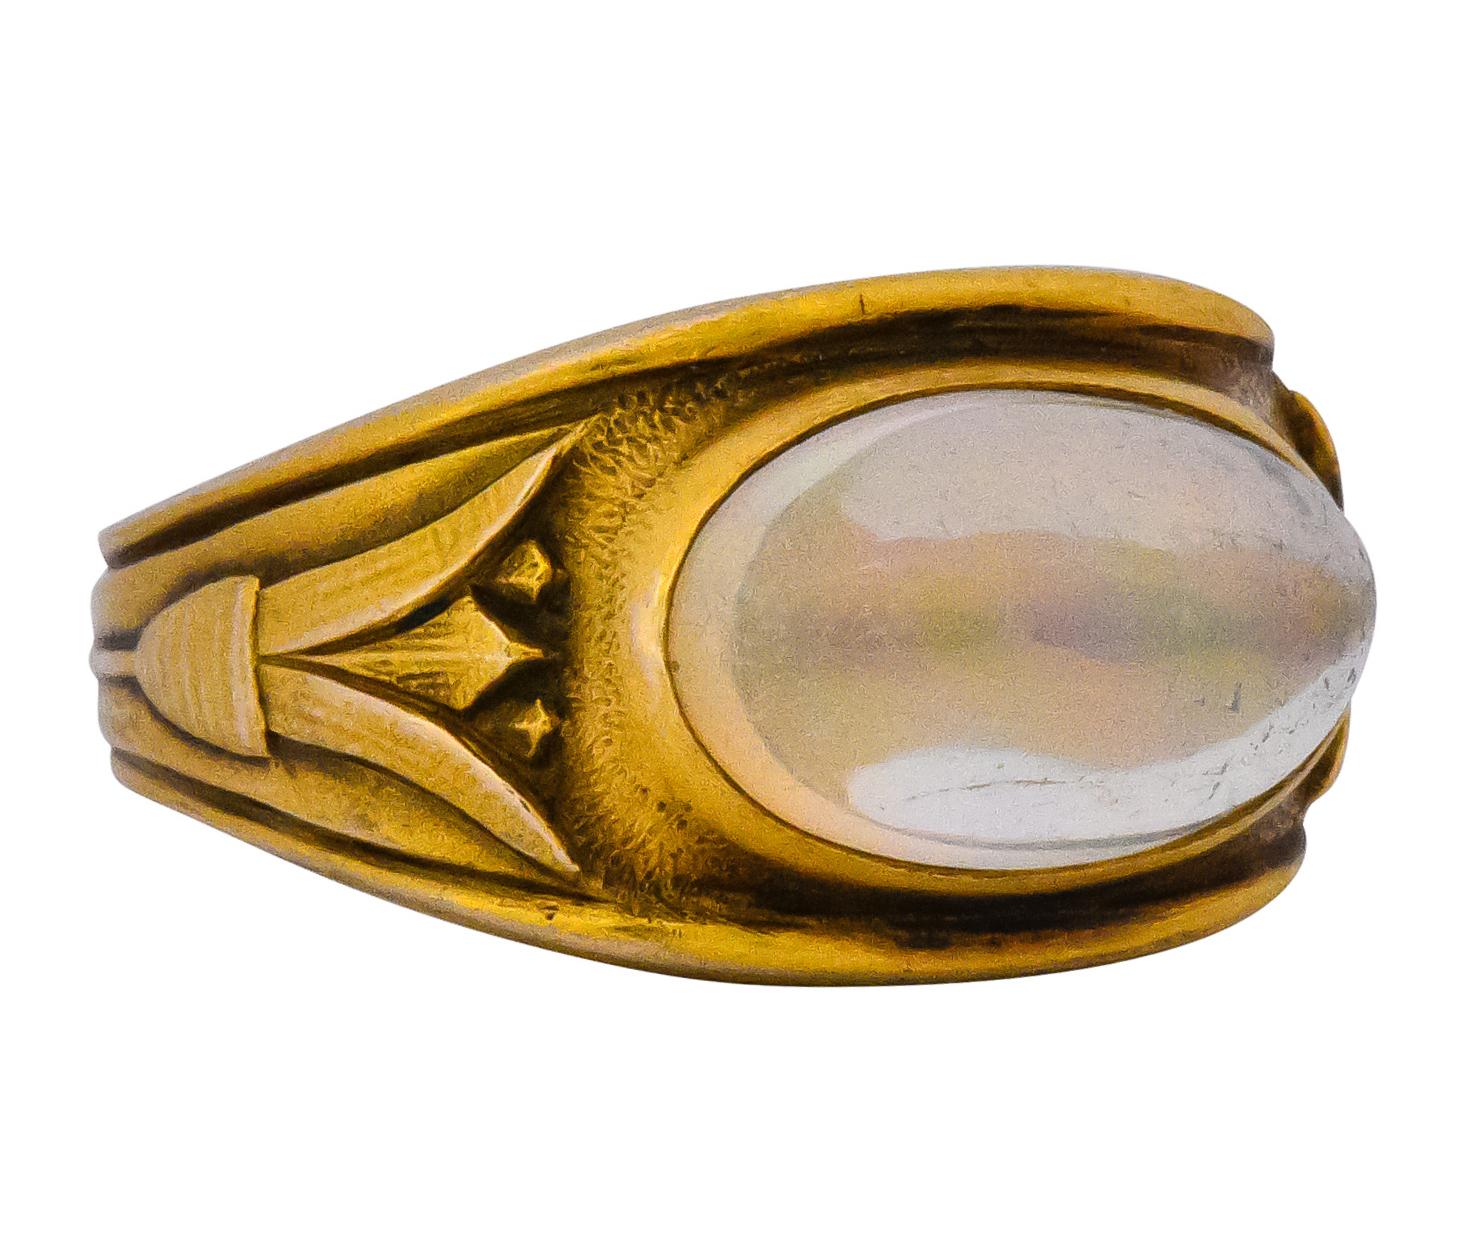 Centering a bezel set jelly opal measuring 3/8 x 9/16 inch, transparent with full spectrum of play-of-color in broad flashes

Matte gold with large stylized flowers on each shoulder

Stamped 14 with maker's mark

Circa 1905

Ring Size: 4

Measures: